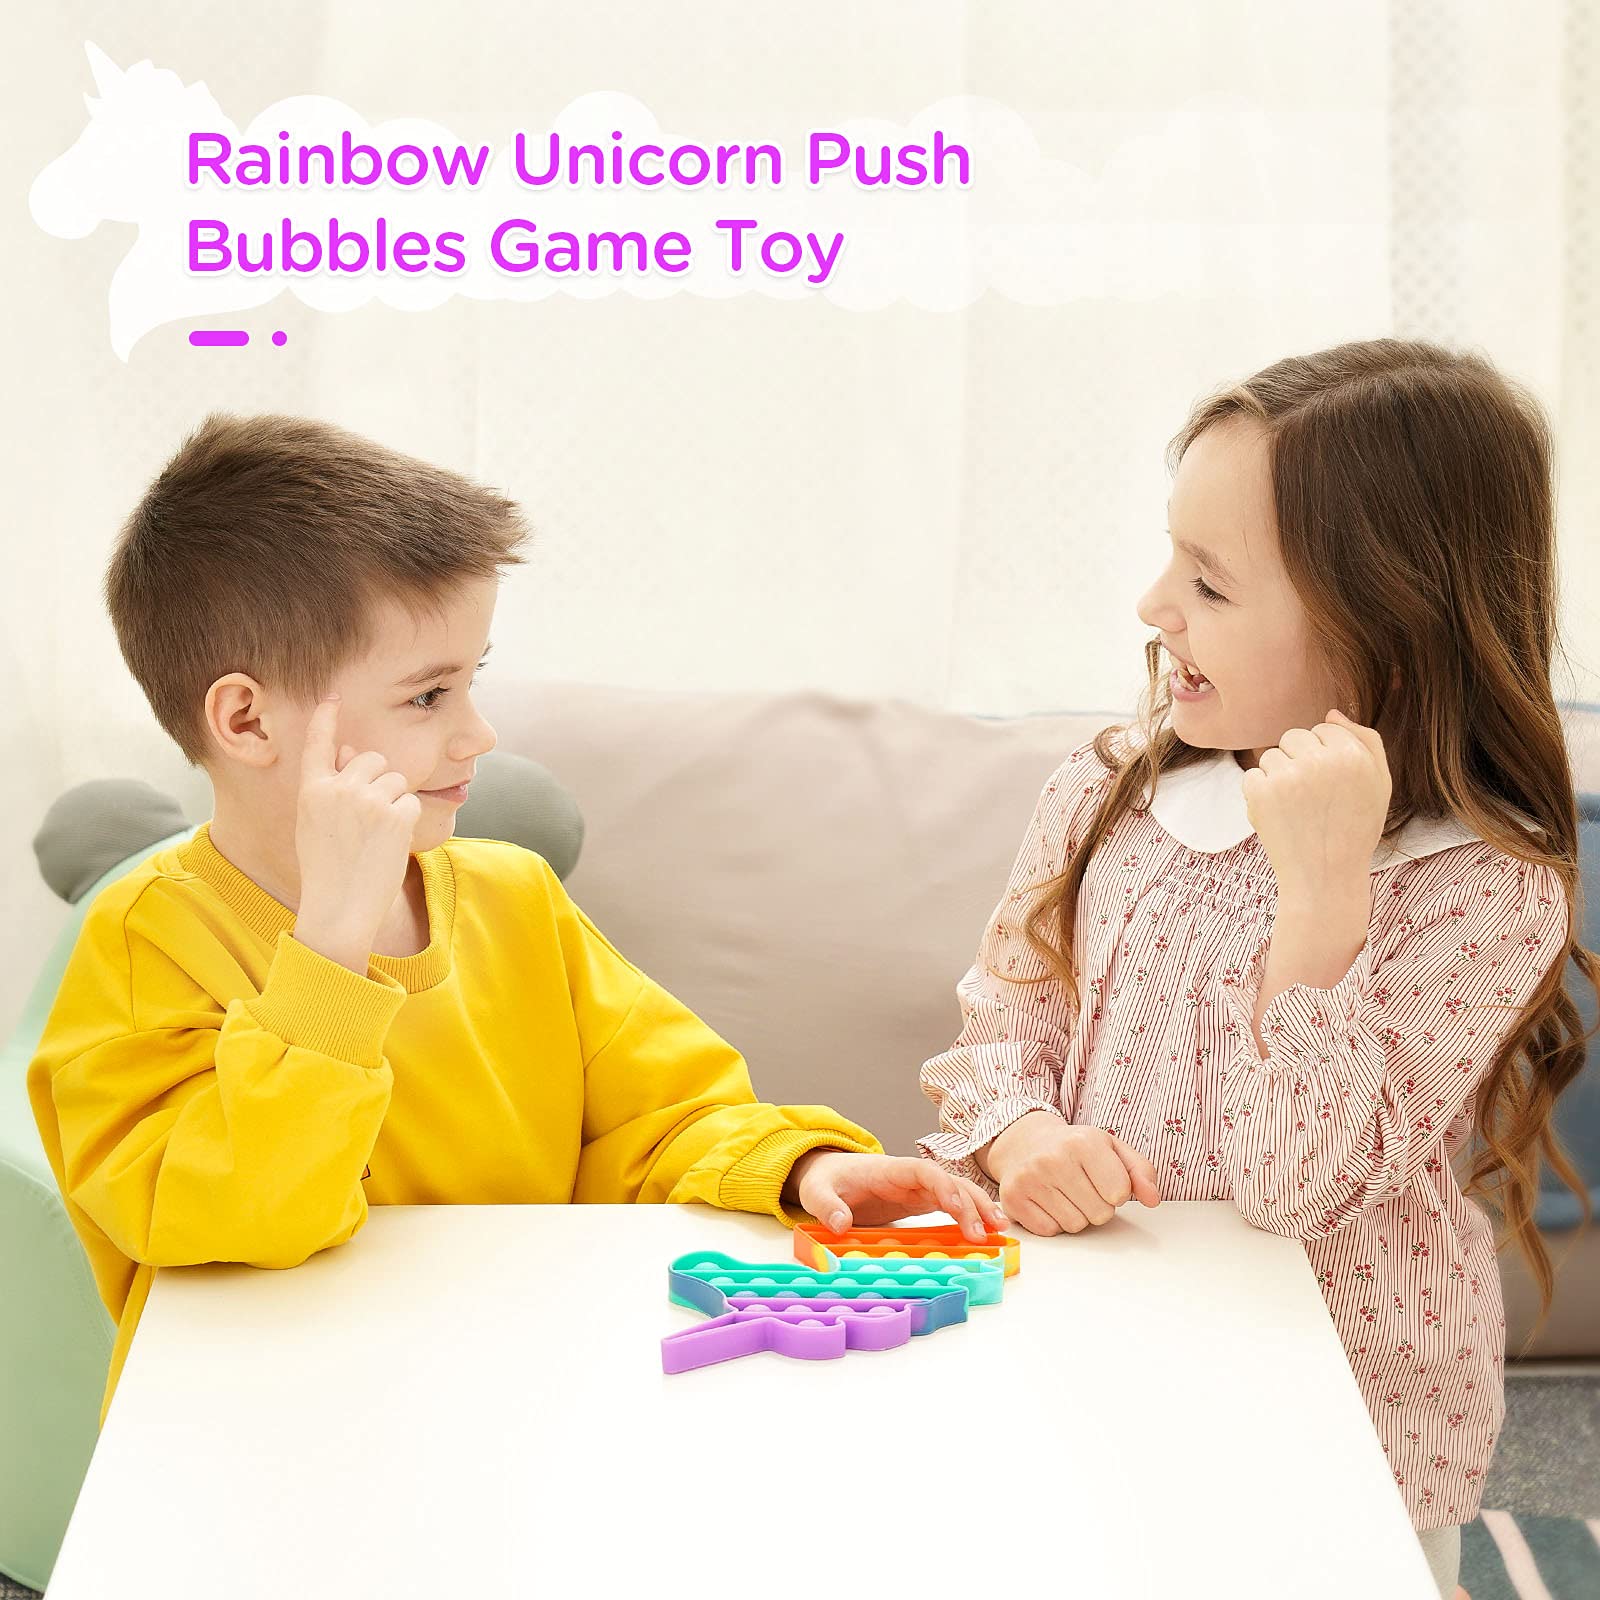 HiUnicorn Rainbow Fidget Toy with Pop Sound, Unicorn Push Bubble Poppers Games Toy Educational School Crafts Gift for Kids, Autism Stress Sensory Toy Reliever(1 Pack Rainbow Unicorn)